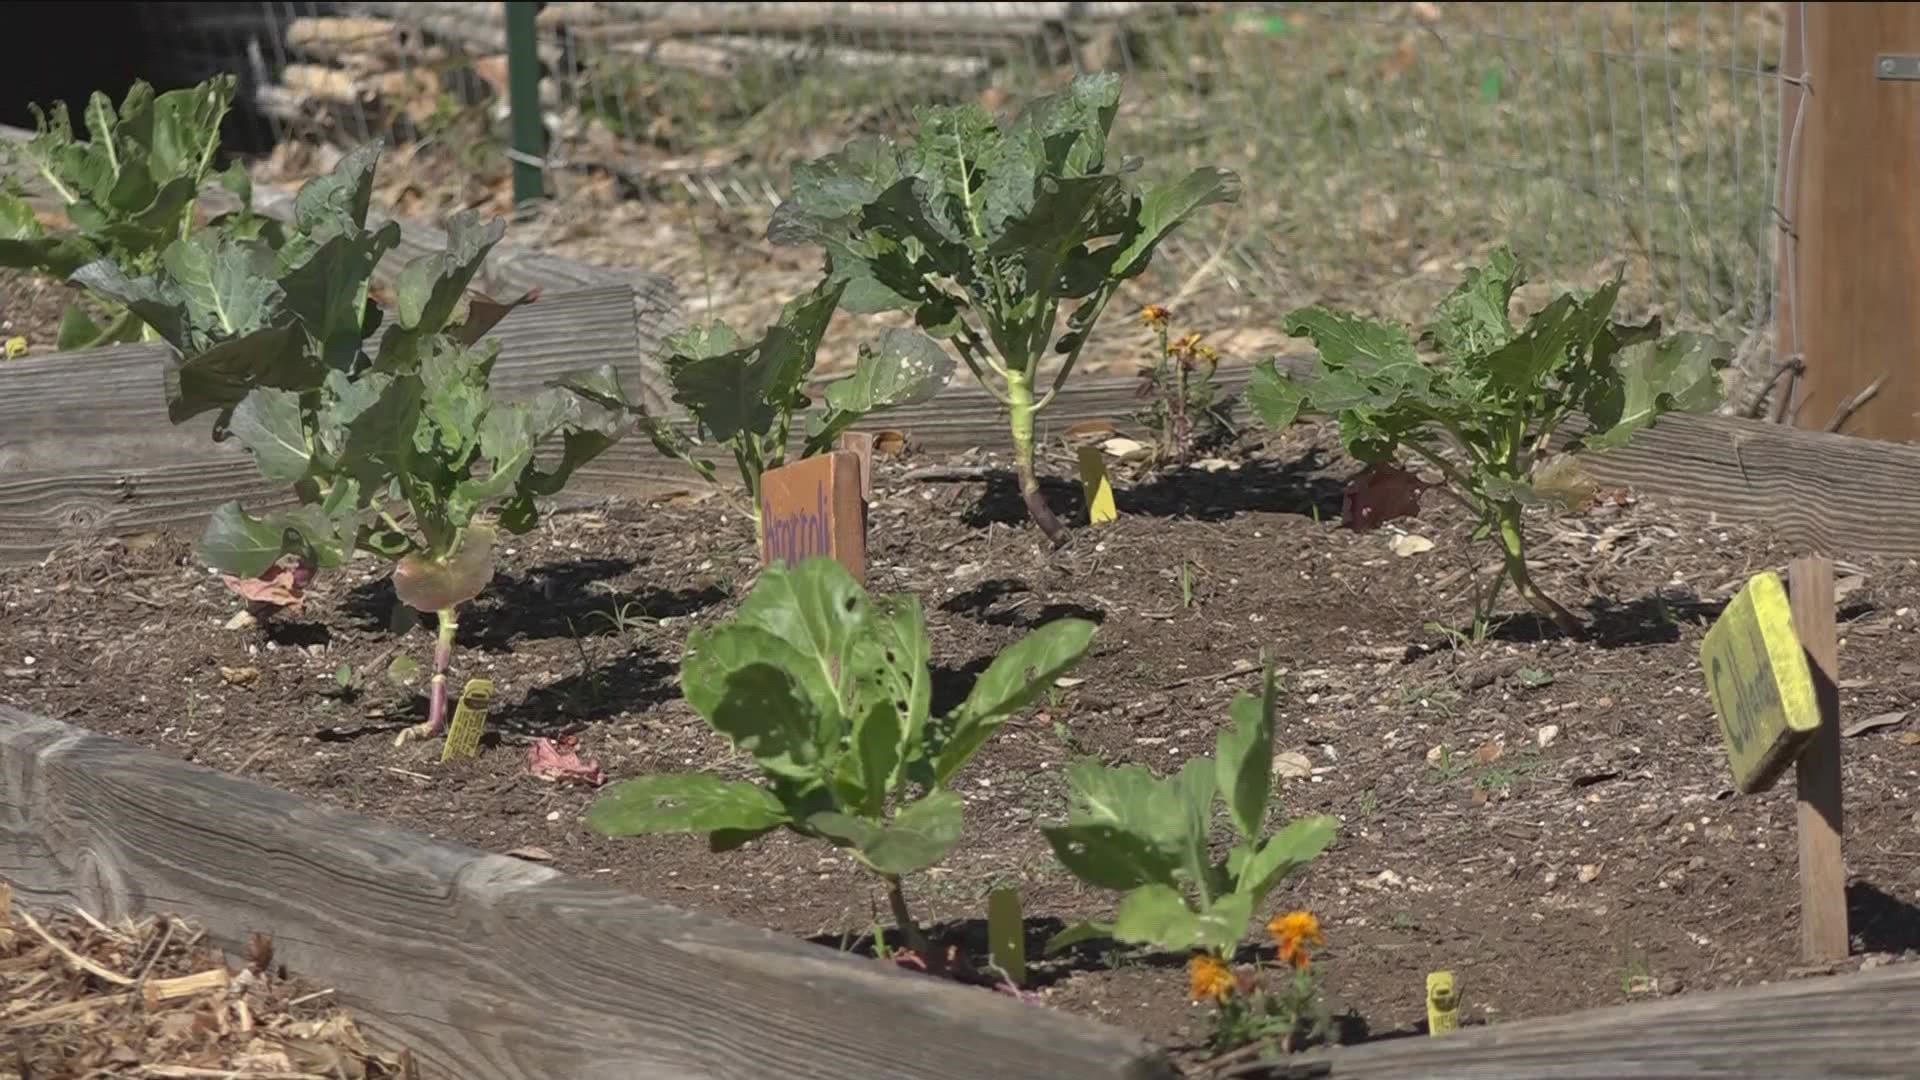 As a way to stop food insecurity in Austin, food forests are being set up to allow community members to get produce for free. KVUE's Pamela Comme explains.